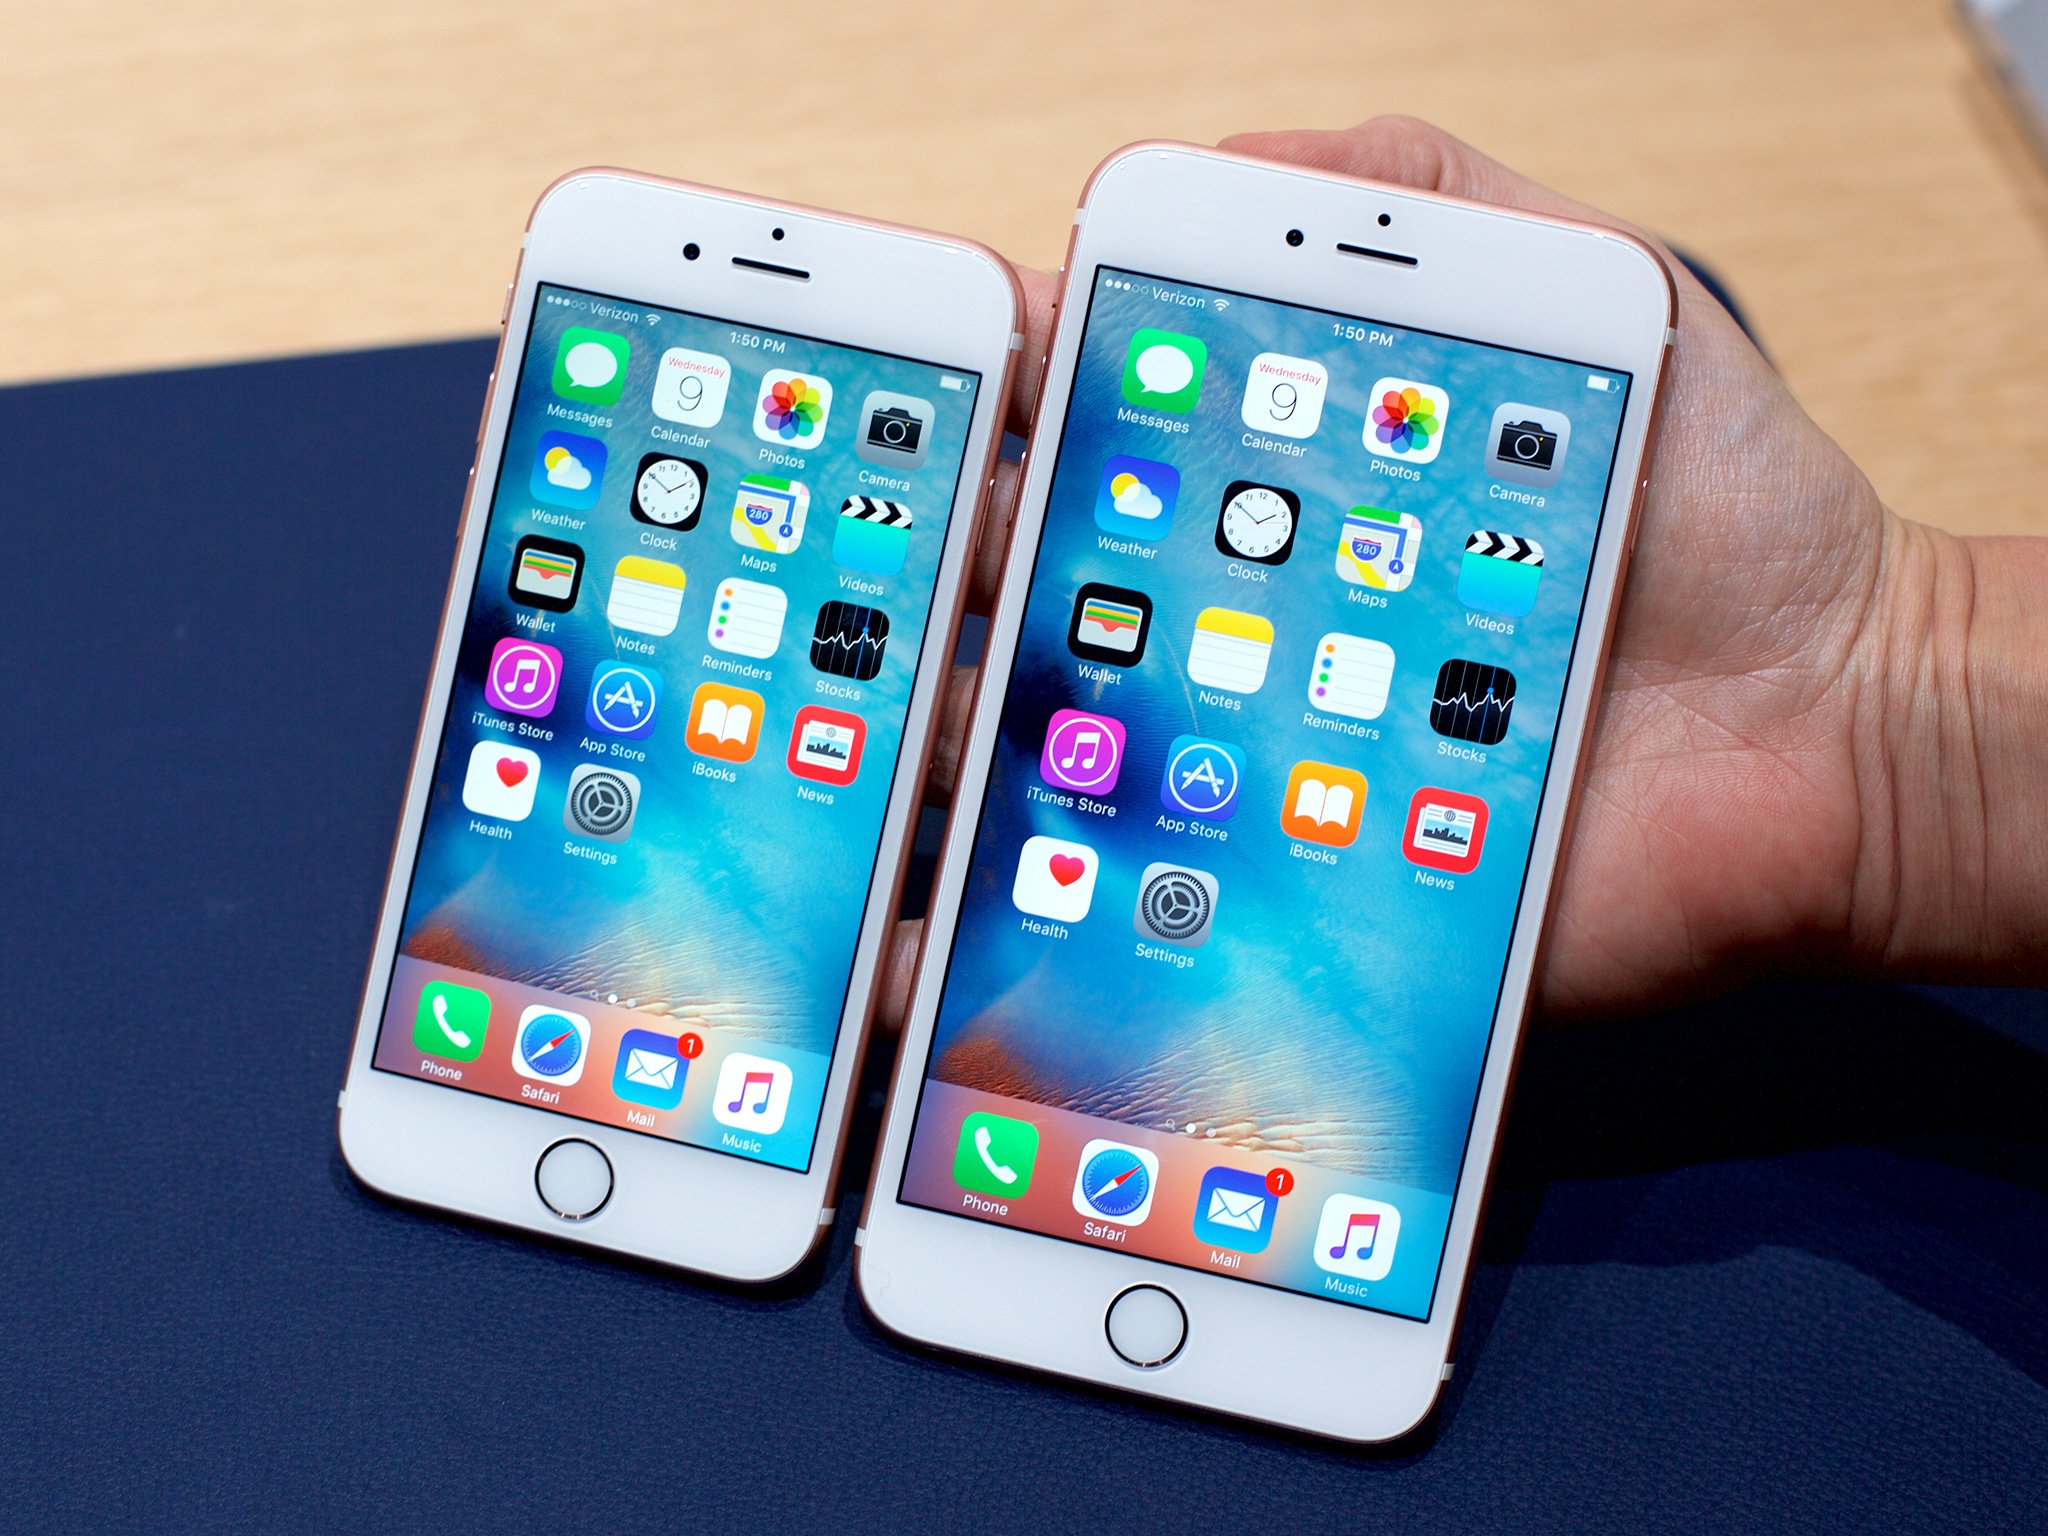 iPhone 6s and iPhone 6s Plus reviews are here